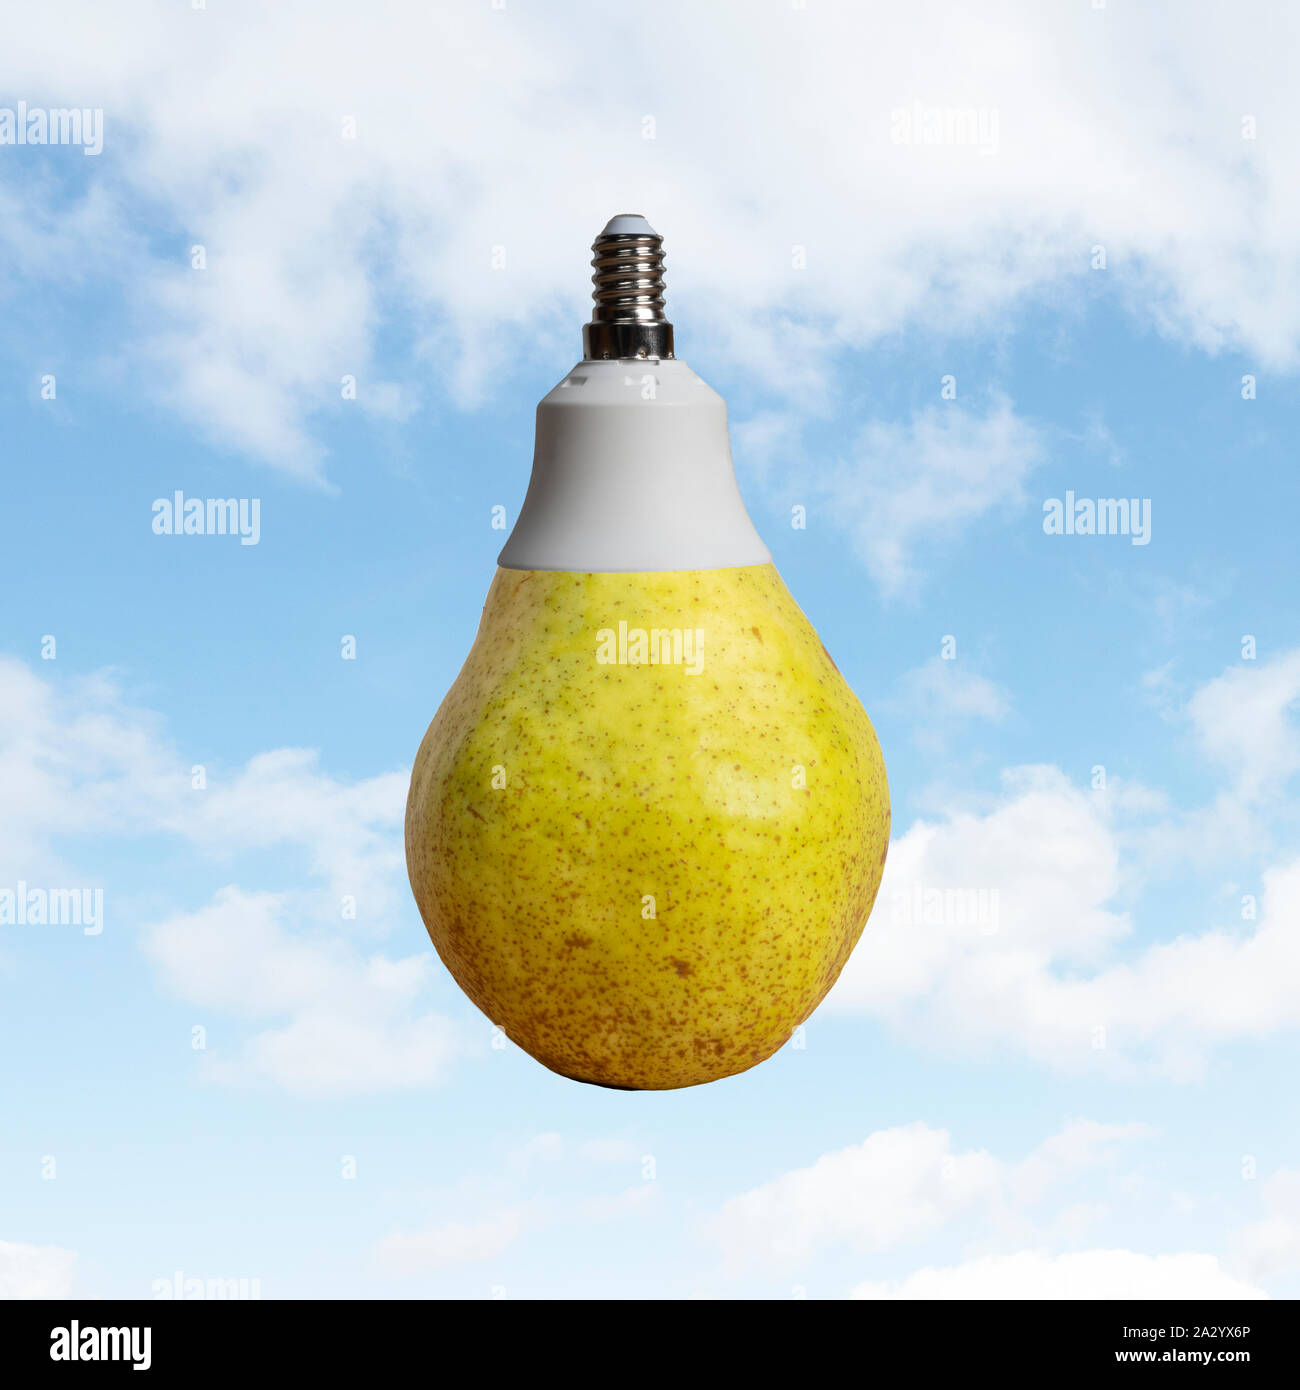 A pear with a light bulb attack with a sky in the background Stock Photo